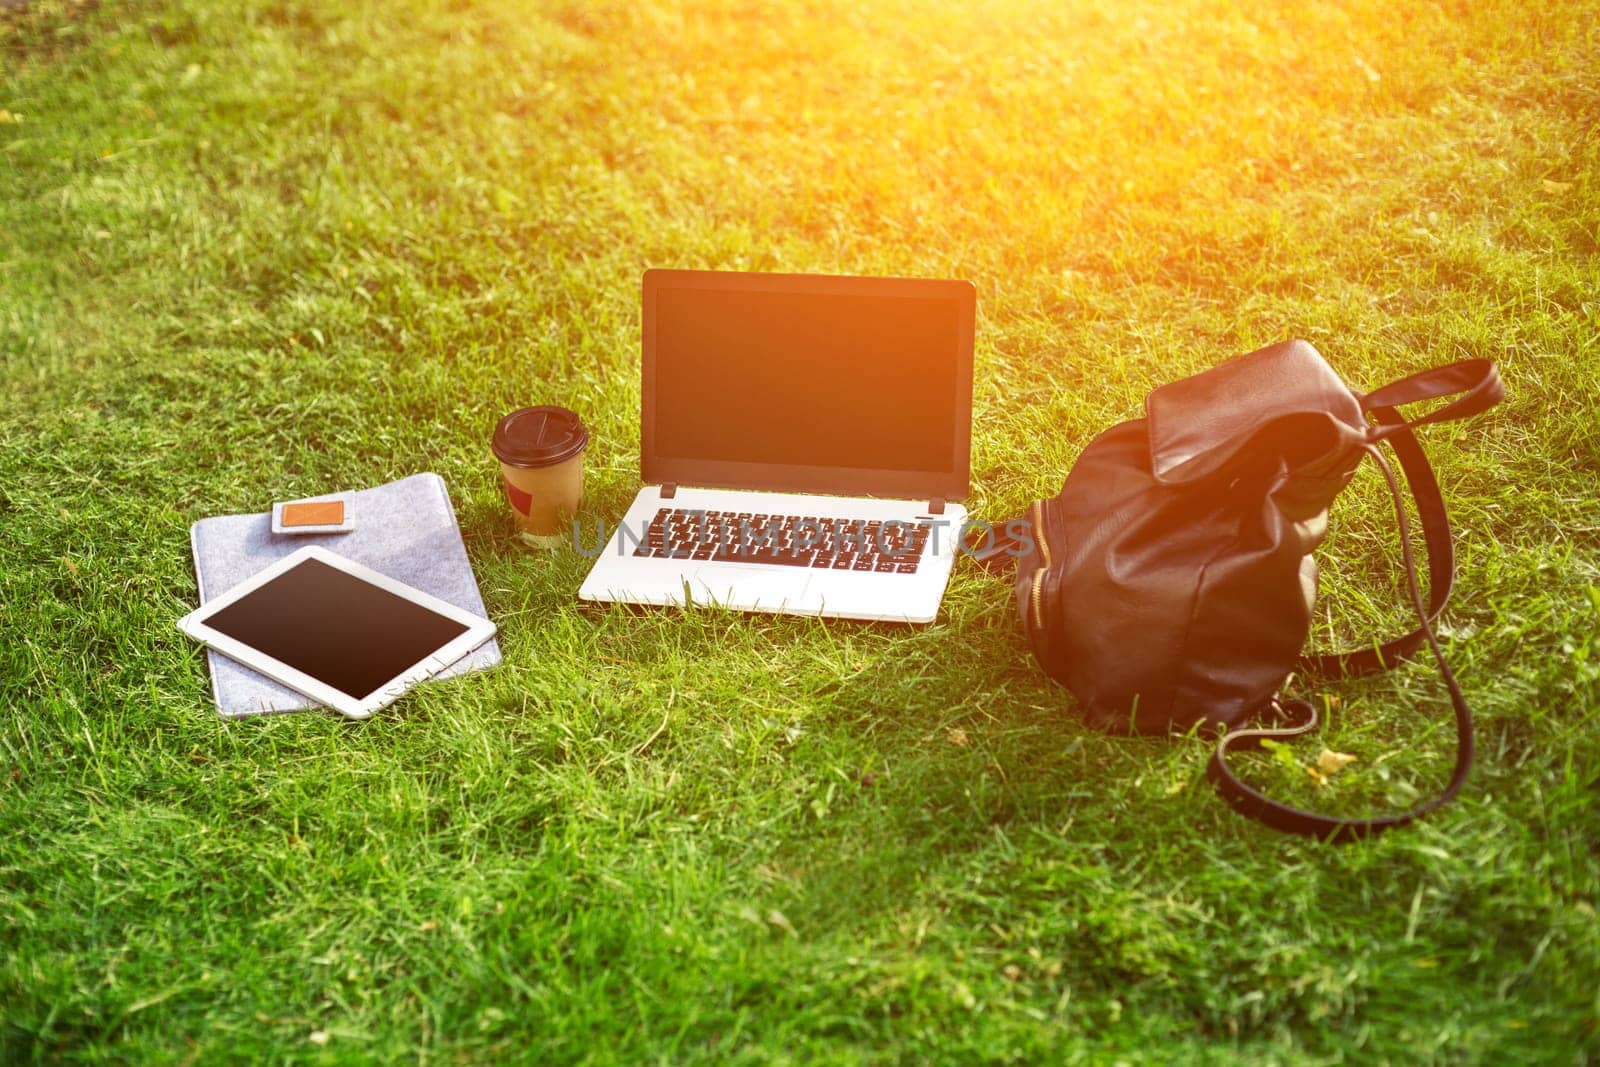 Laptop computer on green grass with coffee cup, bag and tablet in outdoor park. Copy space. Still life. Sun flare